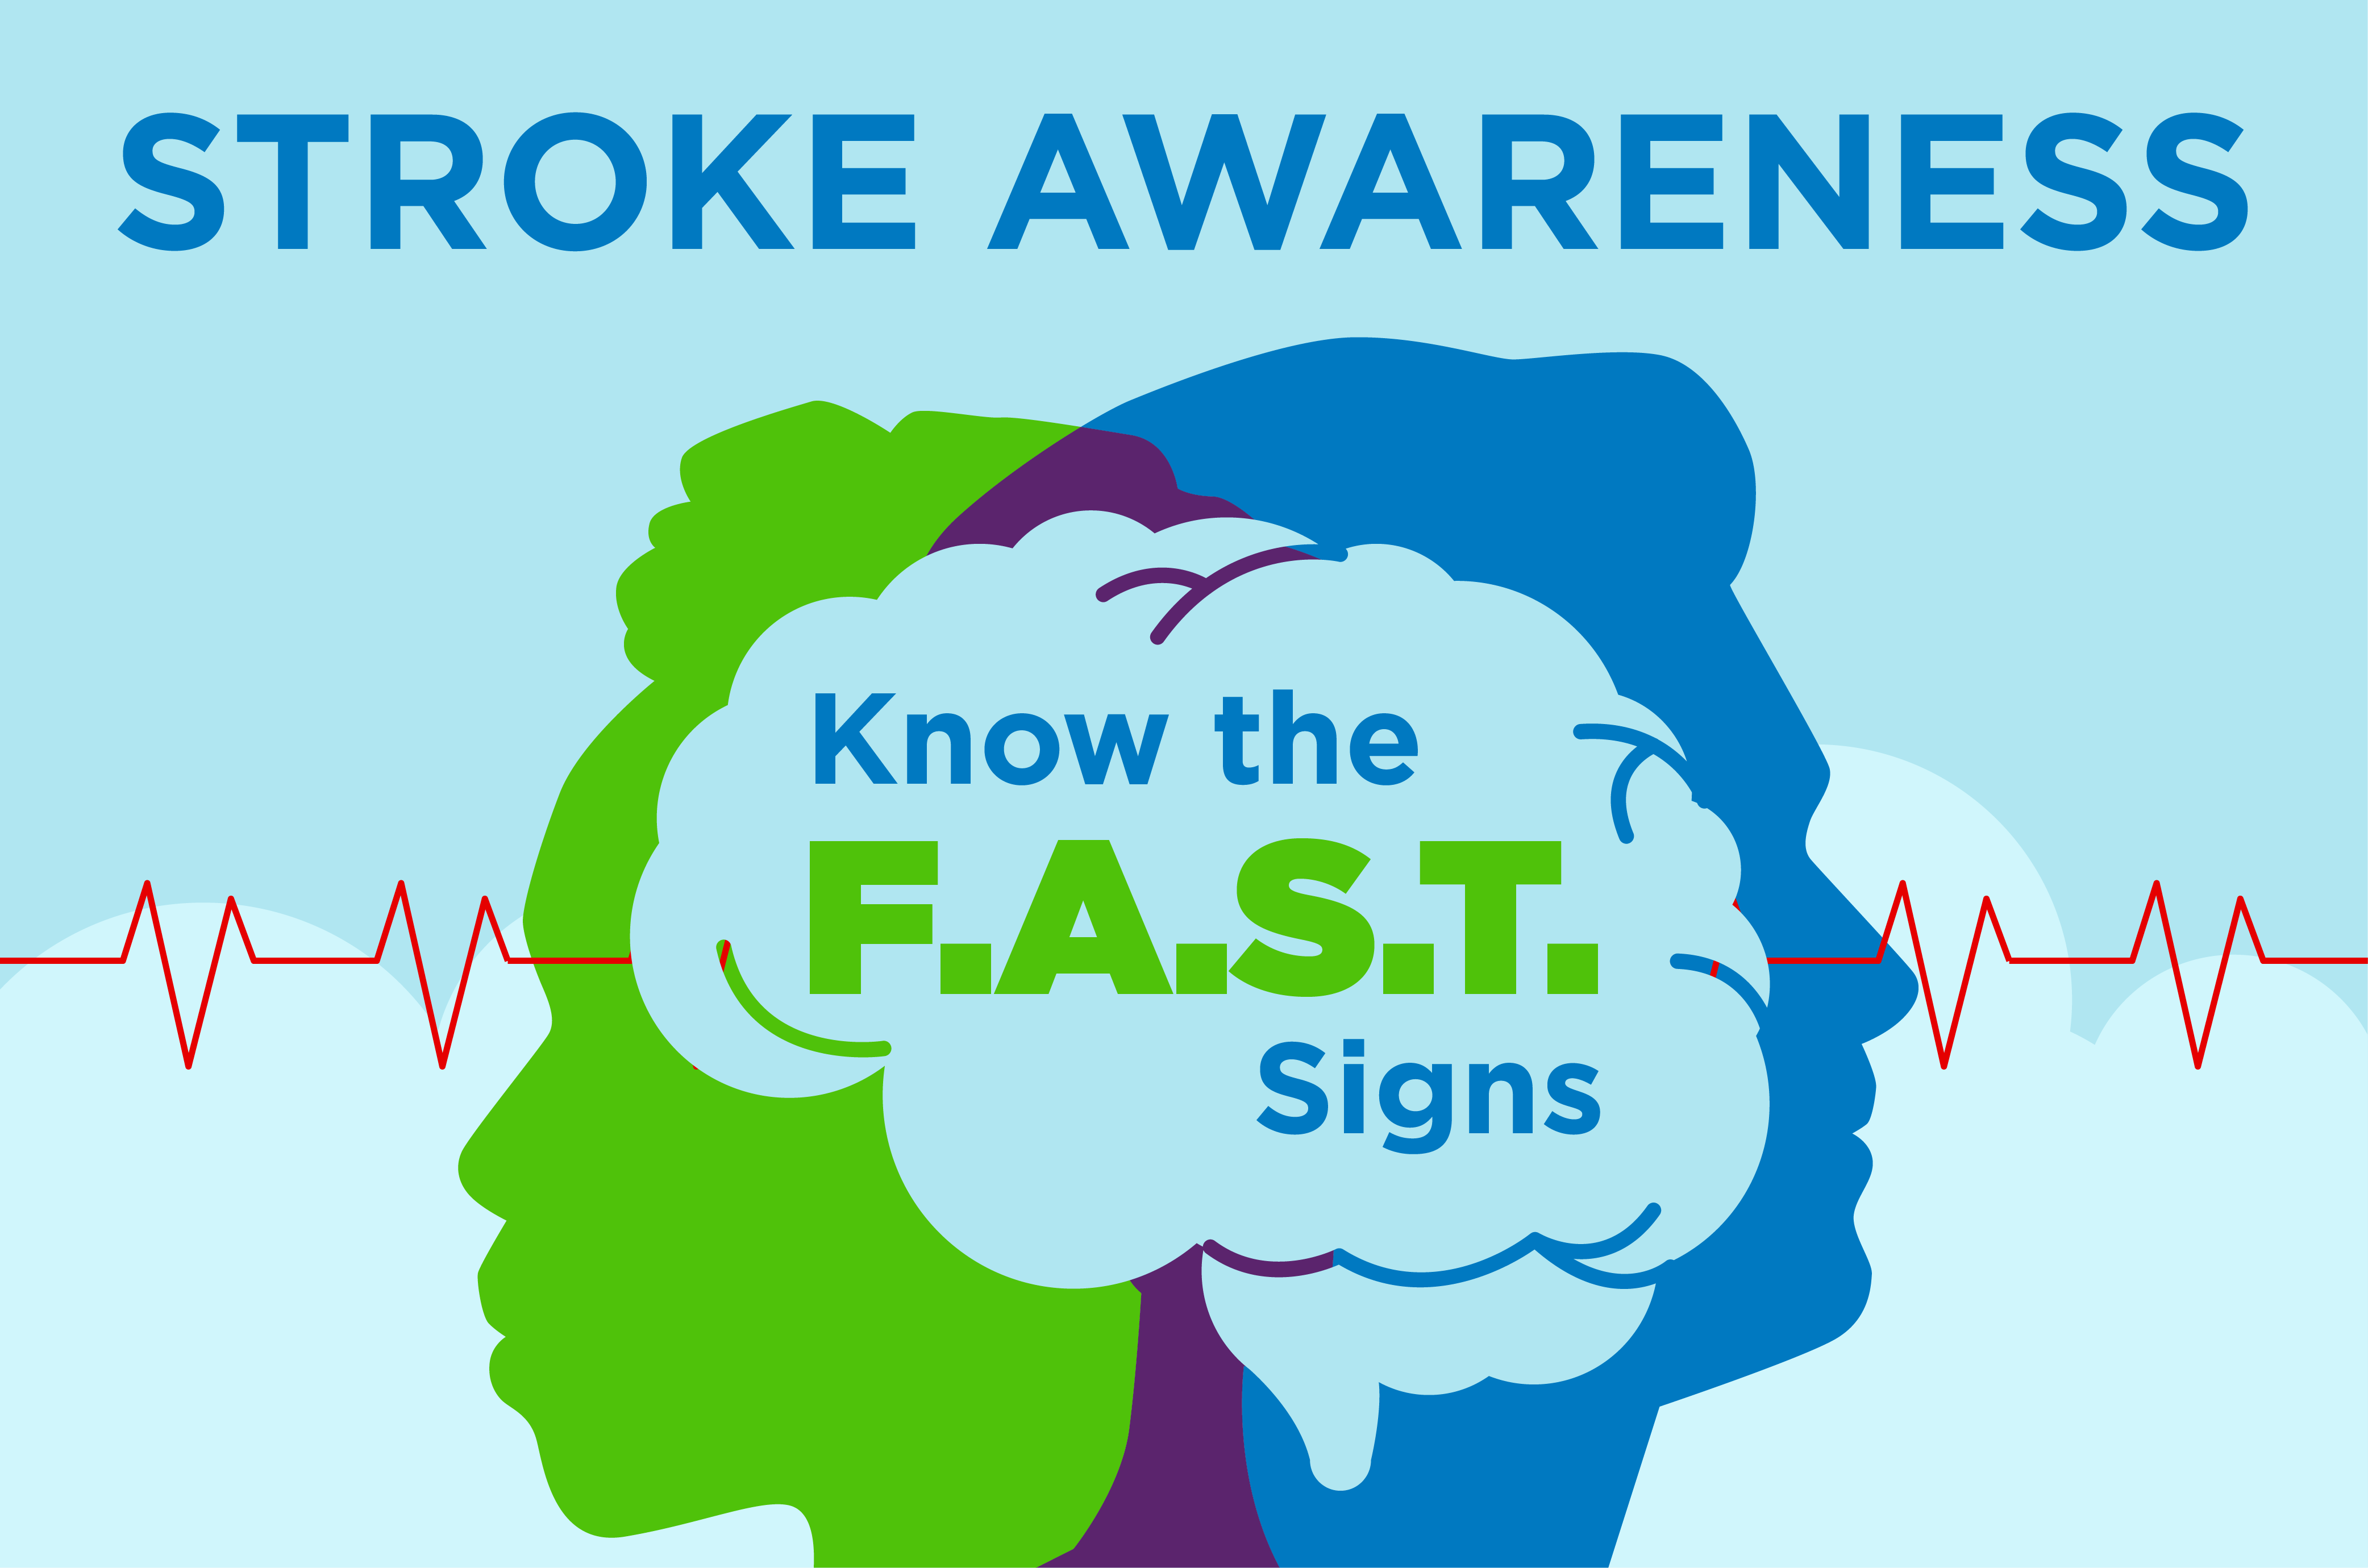 Stroke Awareness. Know the FAST Signs.